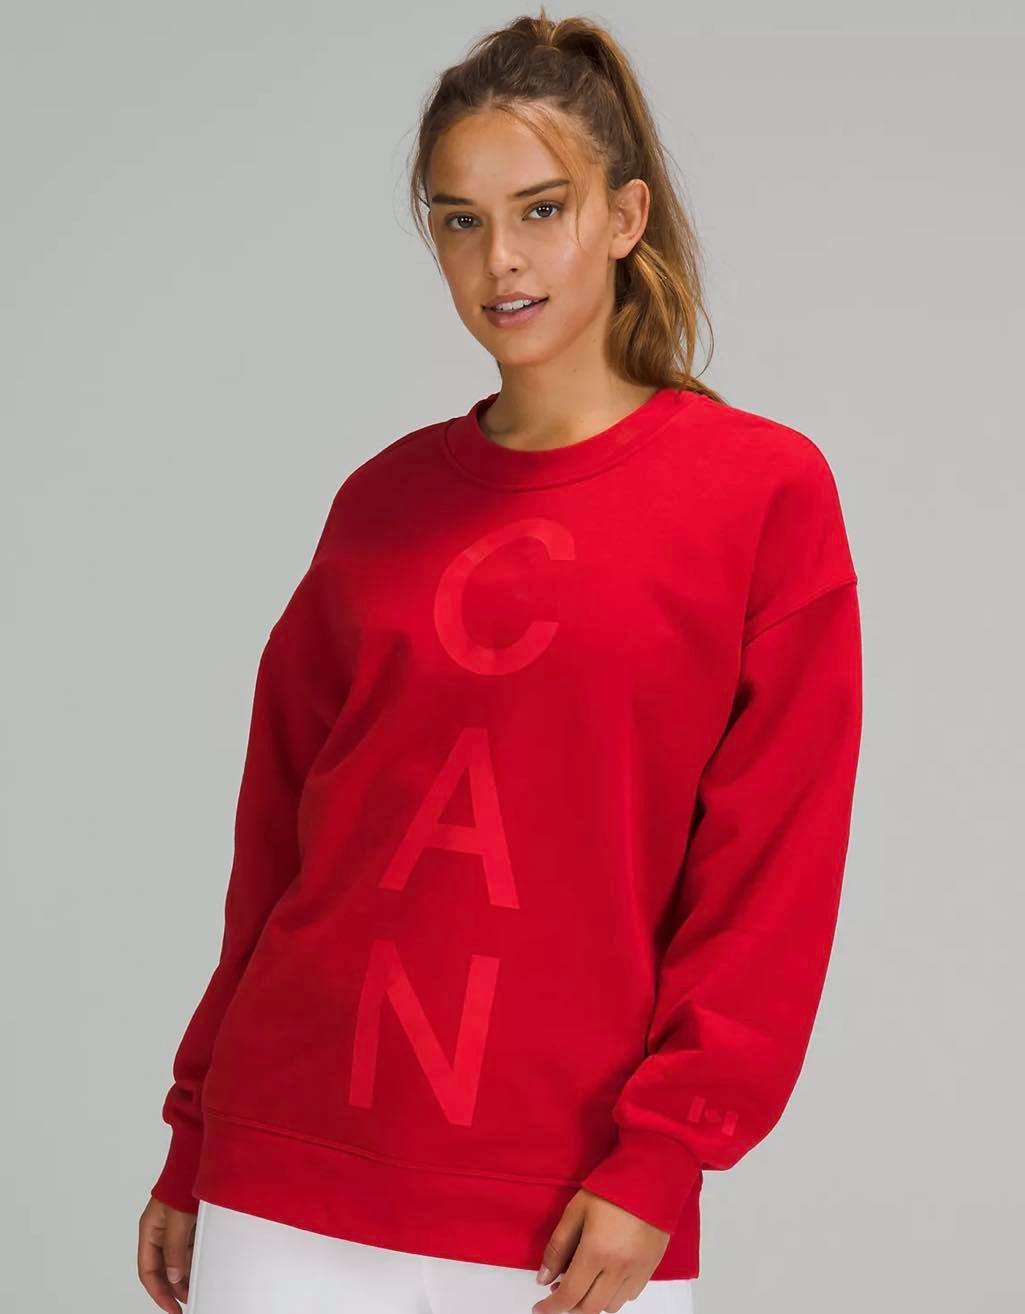 Our favourite pieces from the Team Canada x Lululemon Olympic 